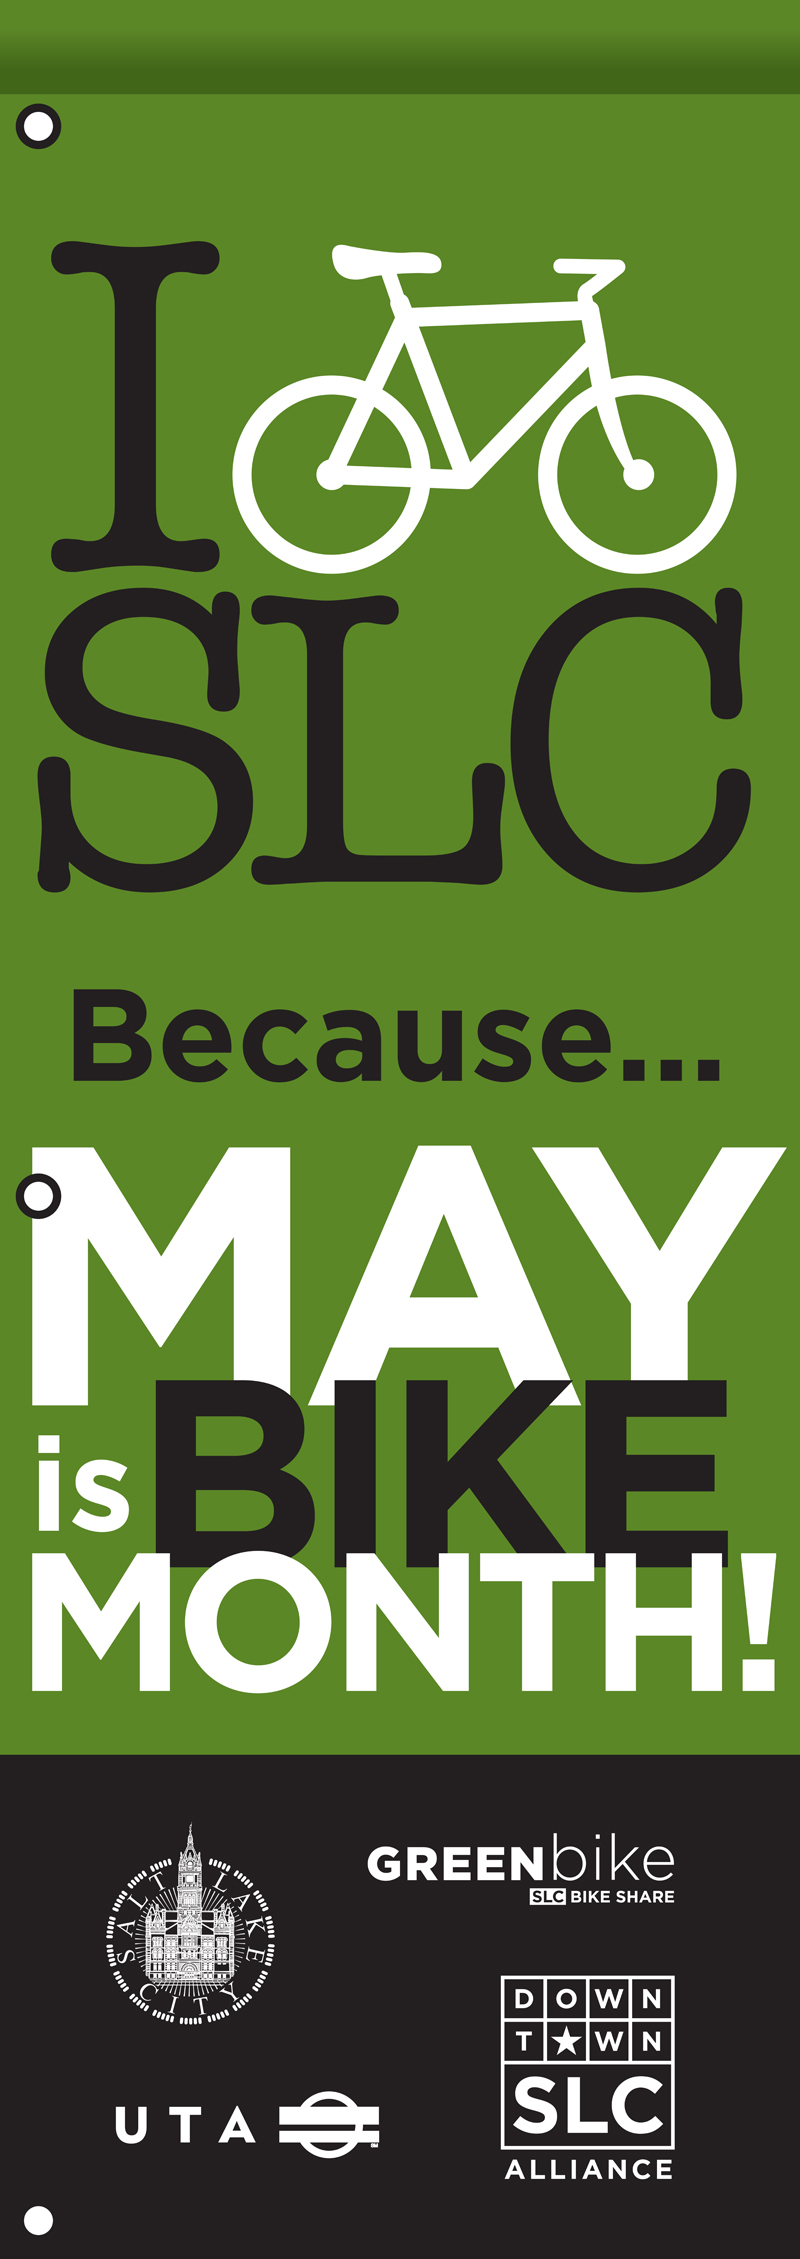 May is 2014 Bike Month! Get out and Celebrate the Bike!